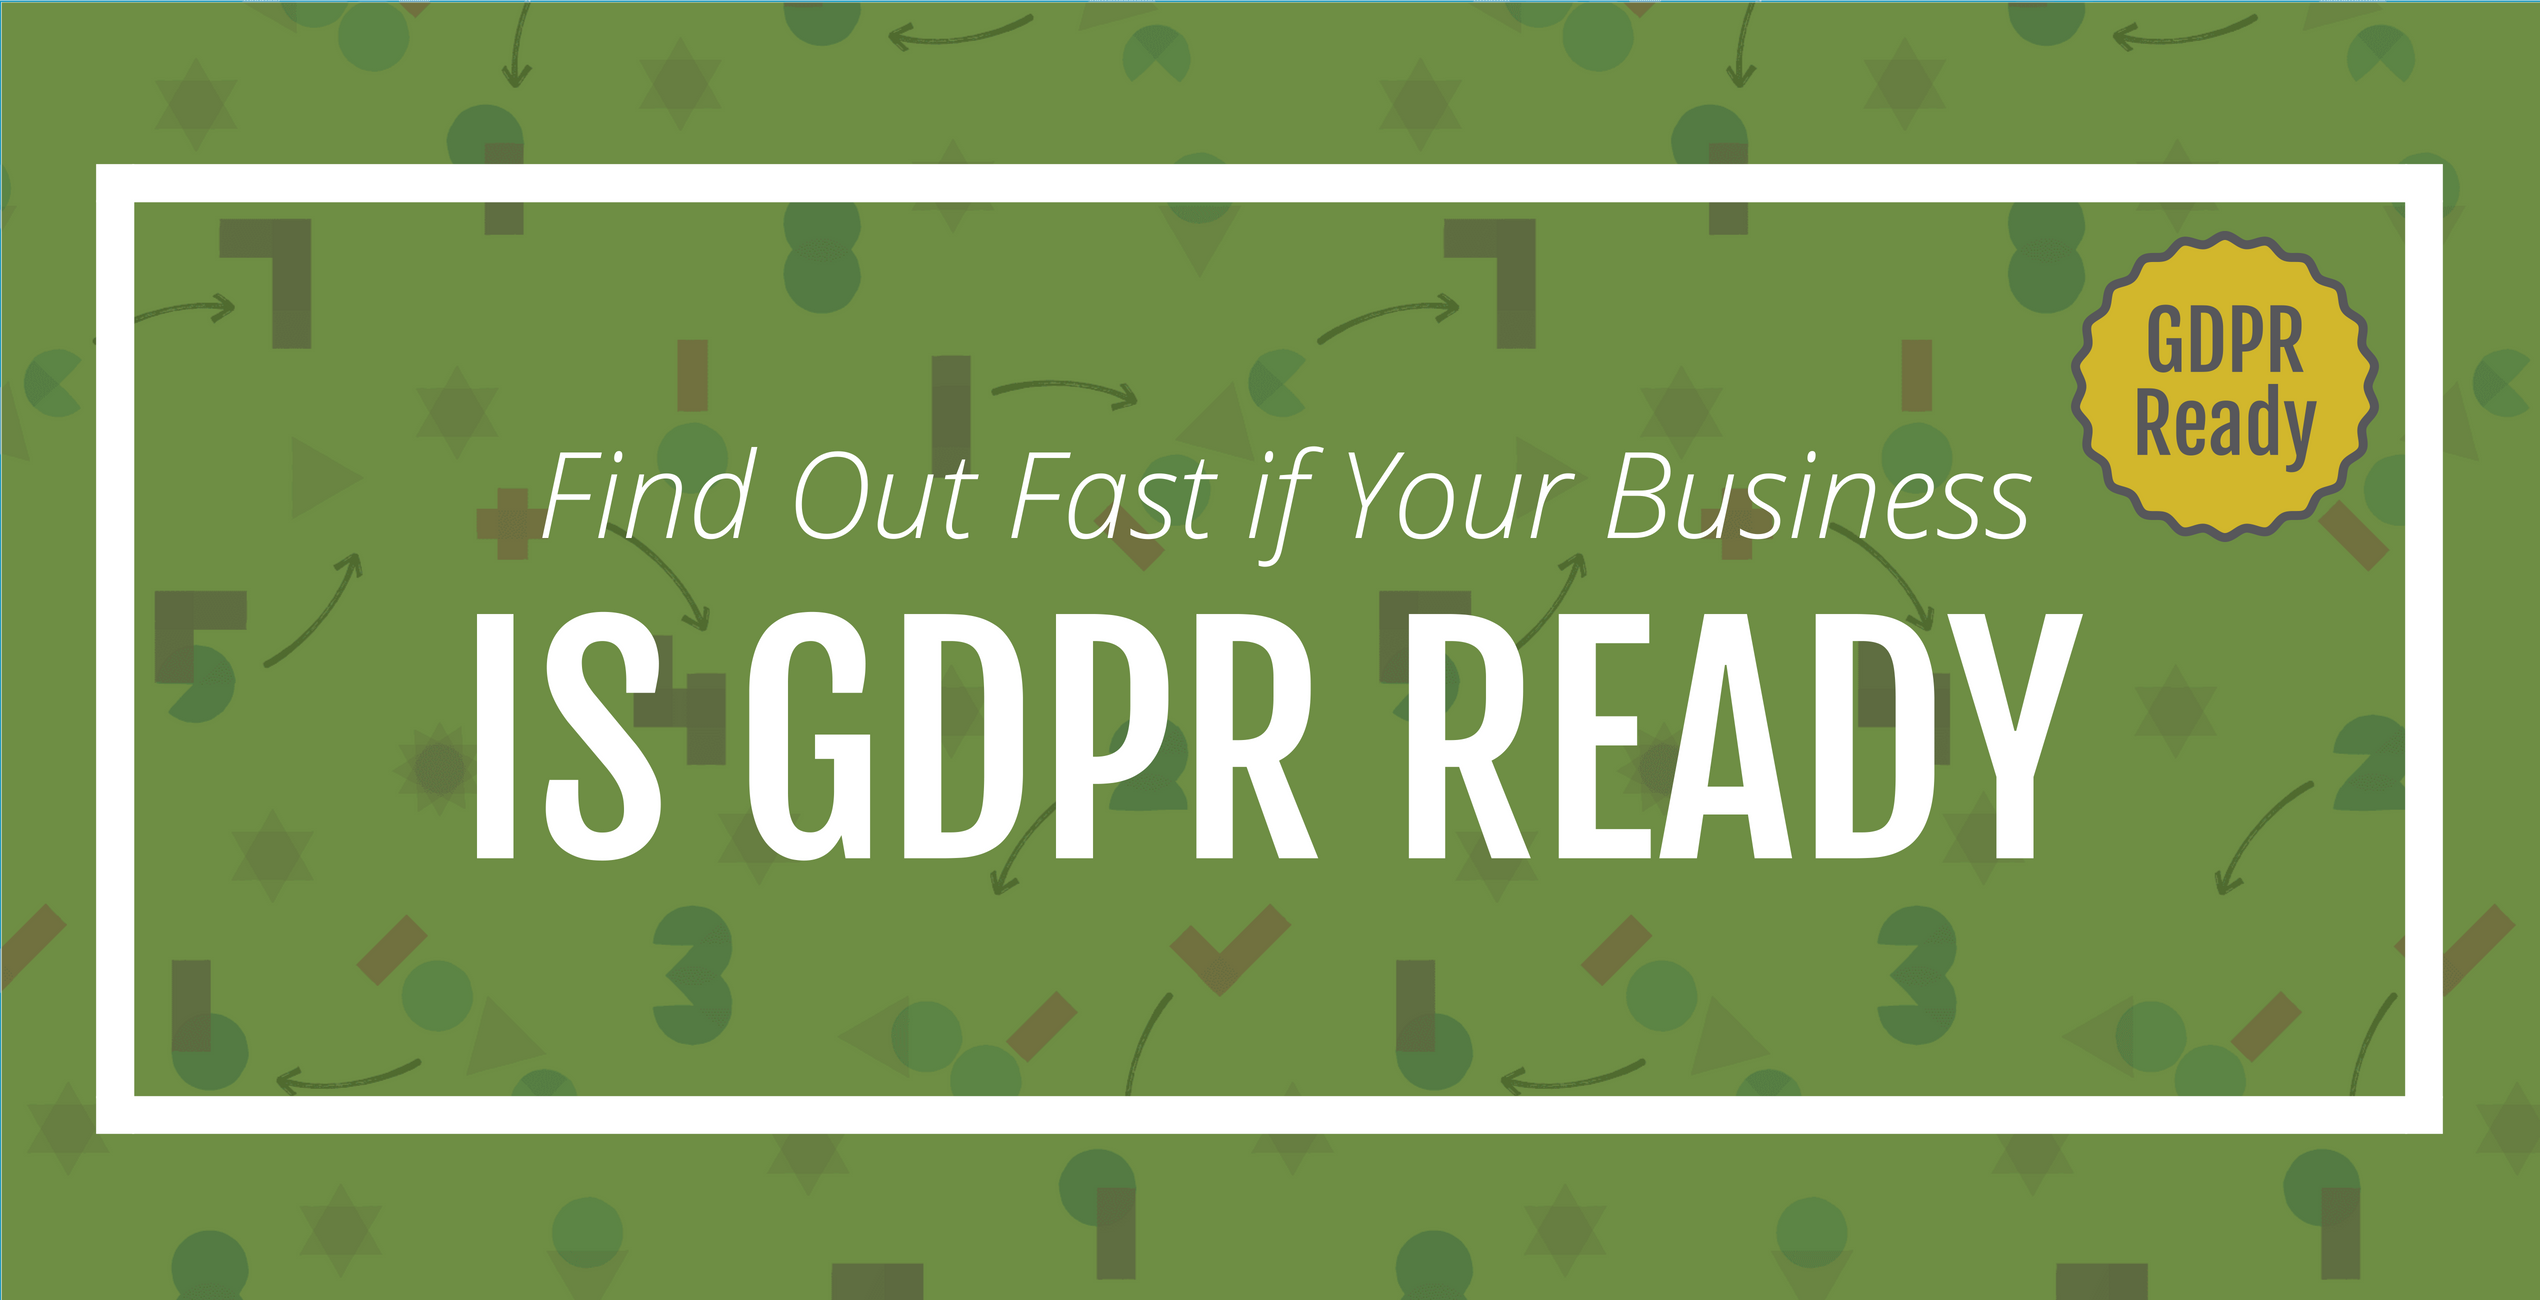 Find Out Fast If Your Business is GDPR Ready